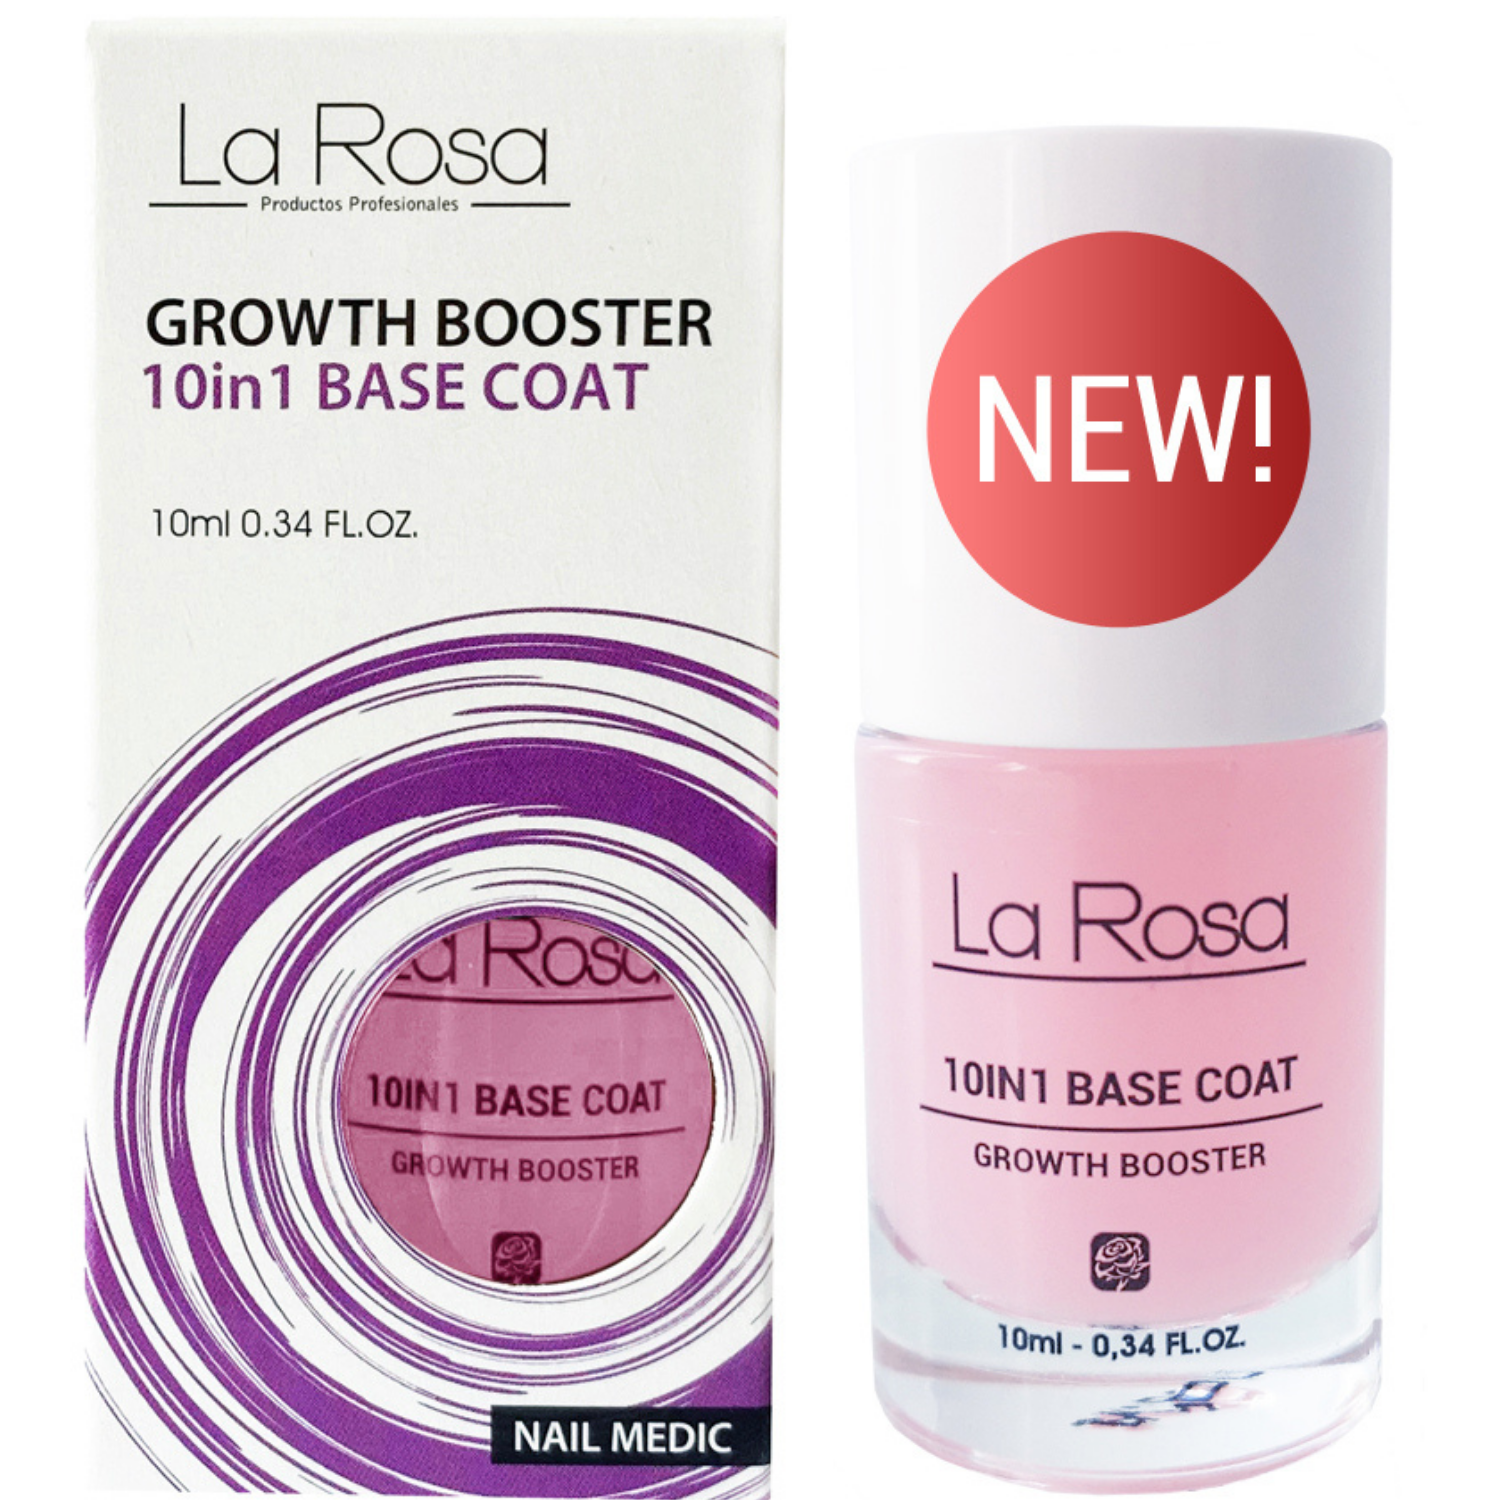 Growth Booster 10in1 Base Coat - La Rosa